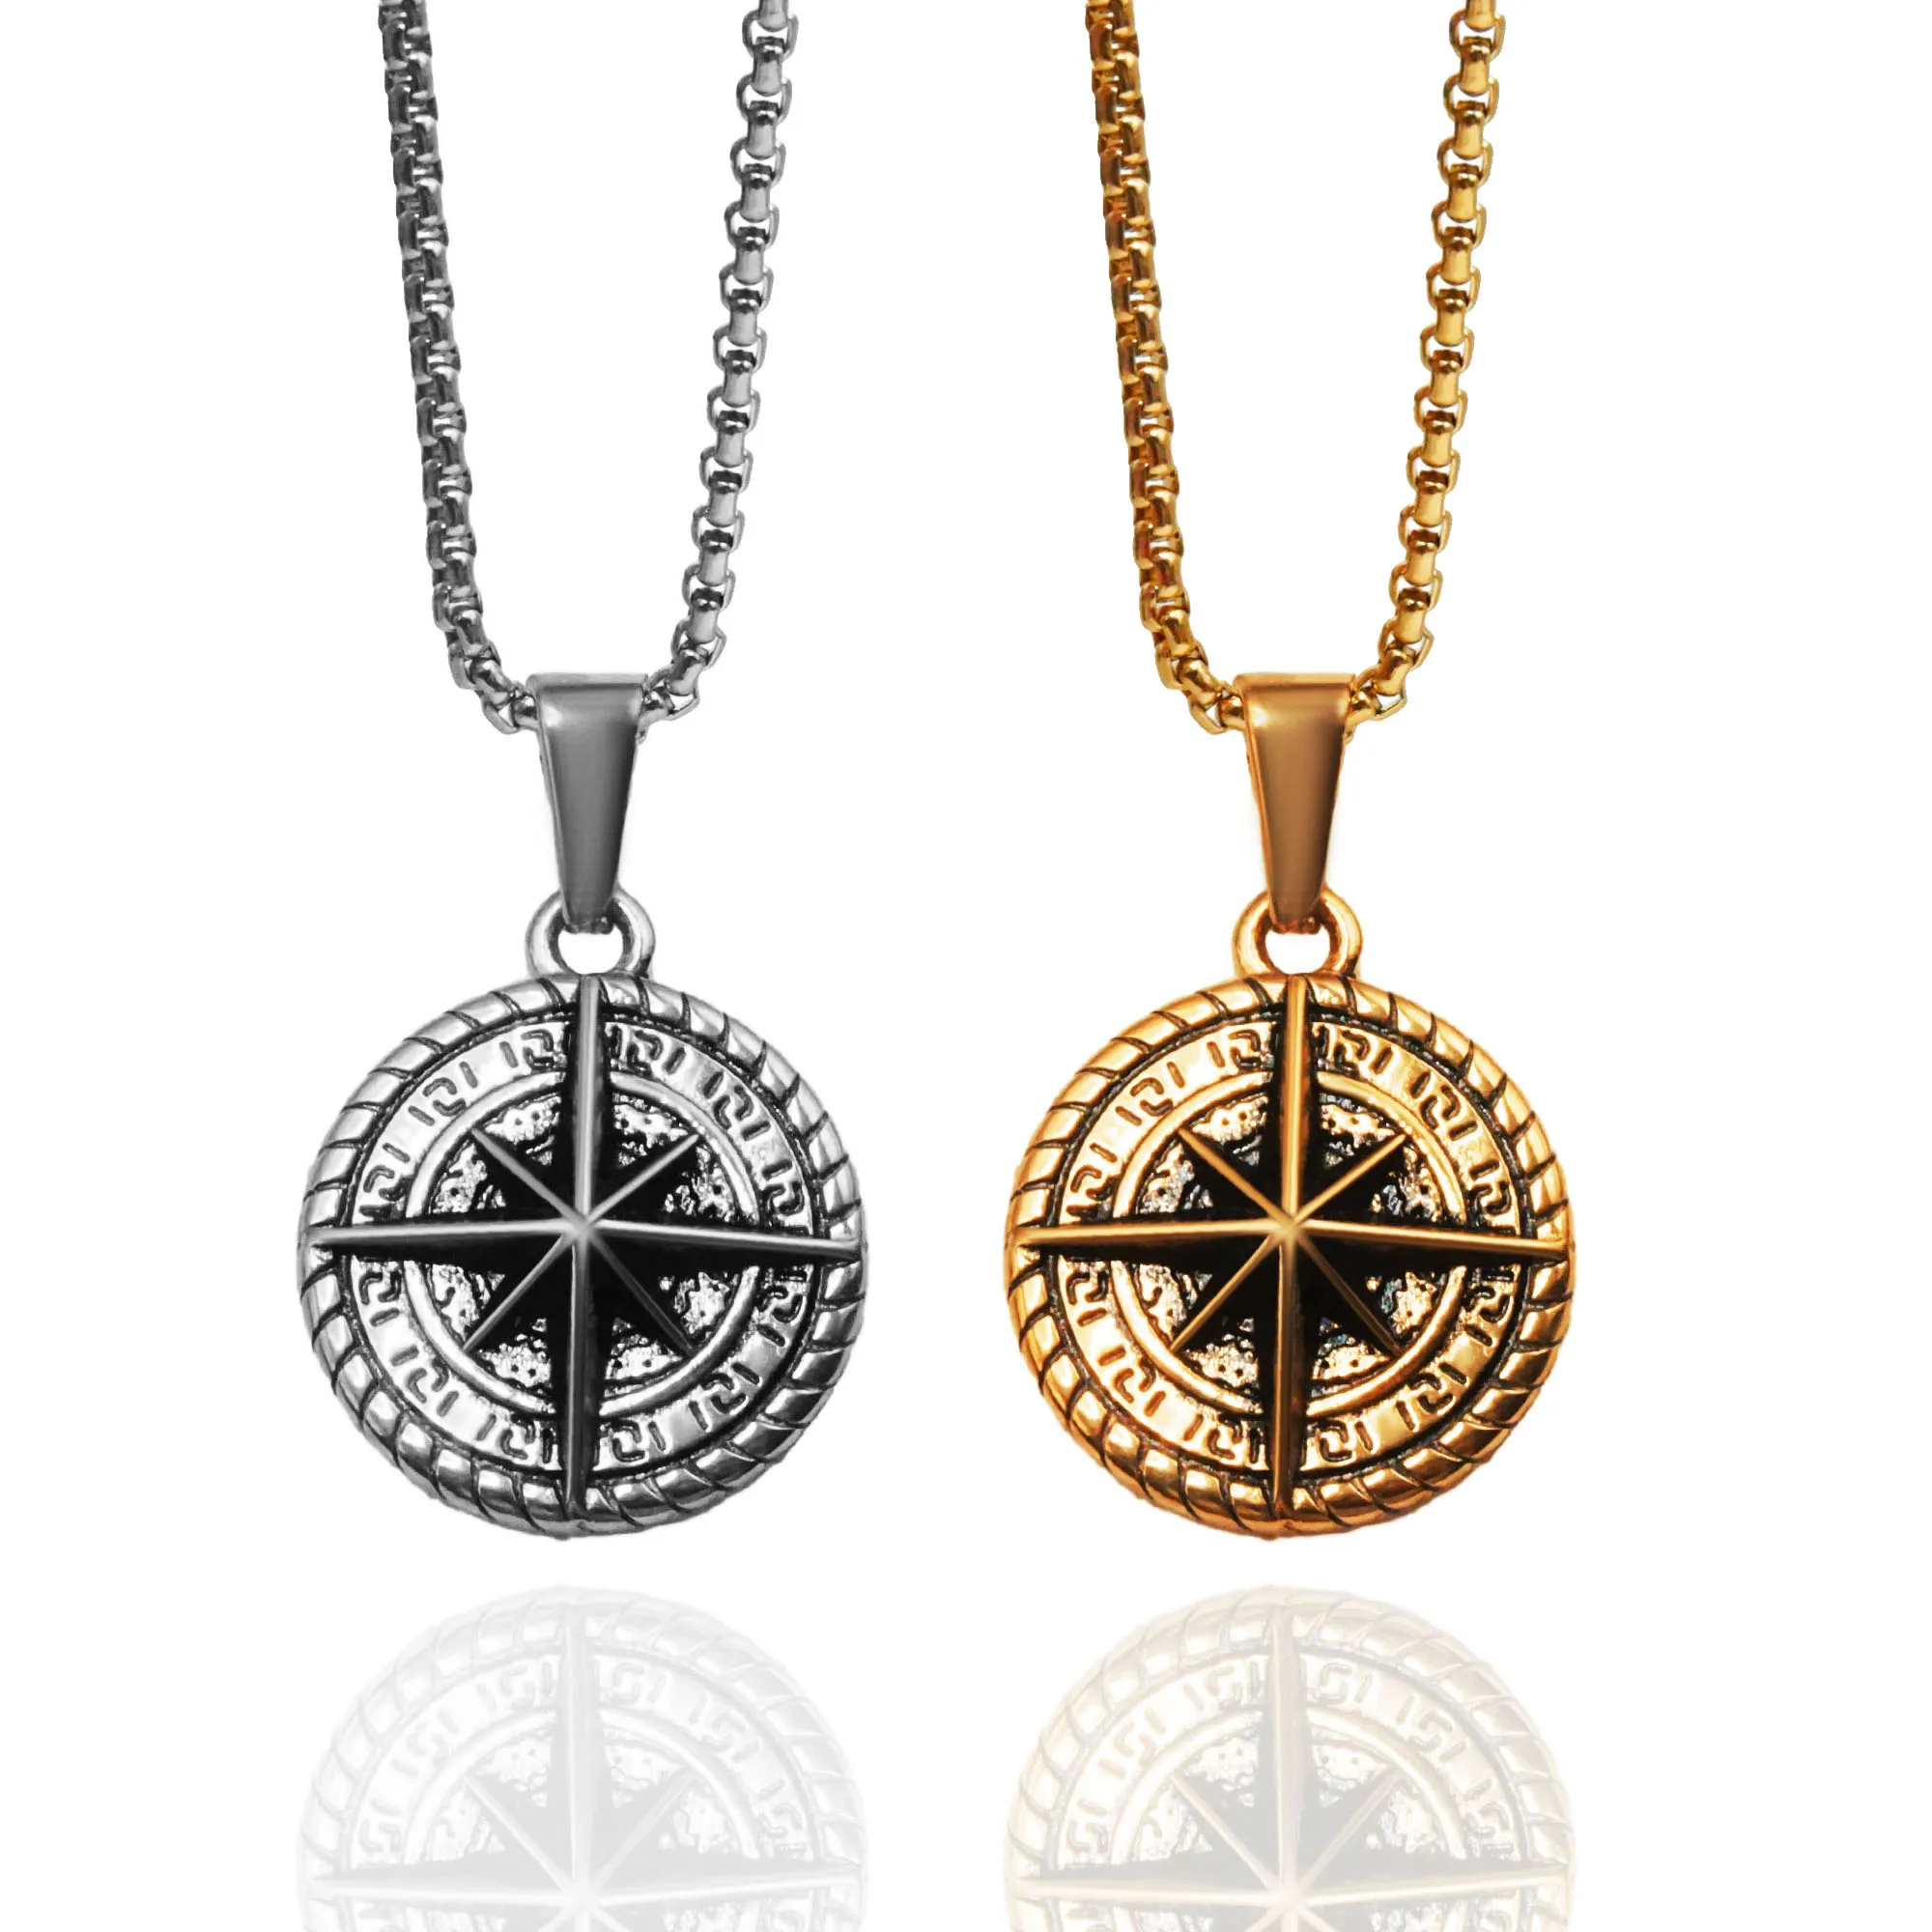 

New Arrival PVD 18k Gold Plated Travel Compass Pendant Waterproof Stainless Steel Vintage North Star Necklace For Men Jewelry